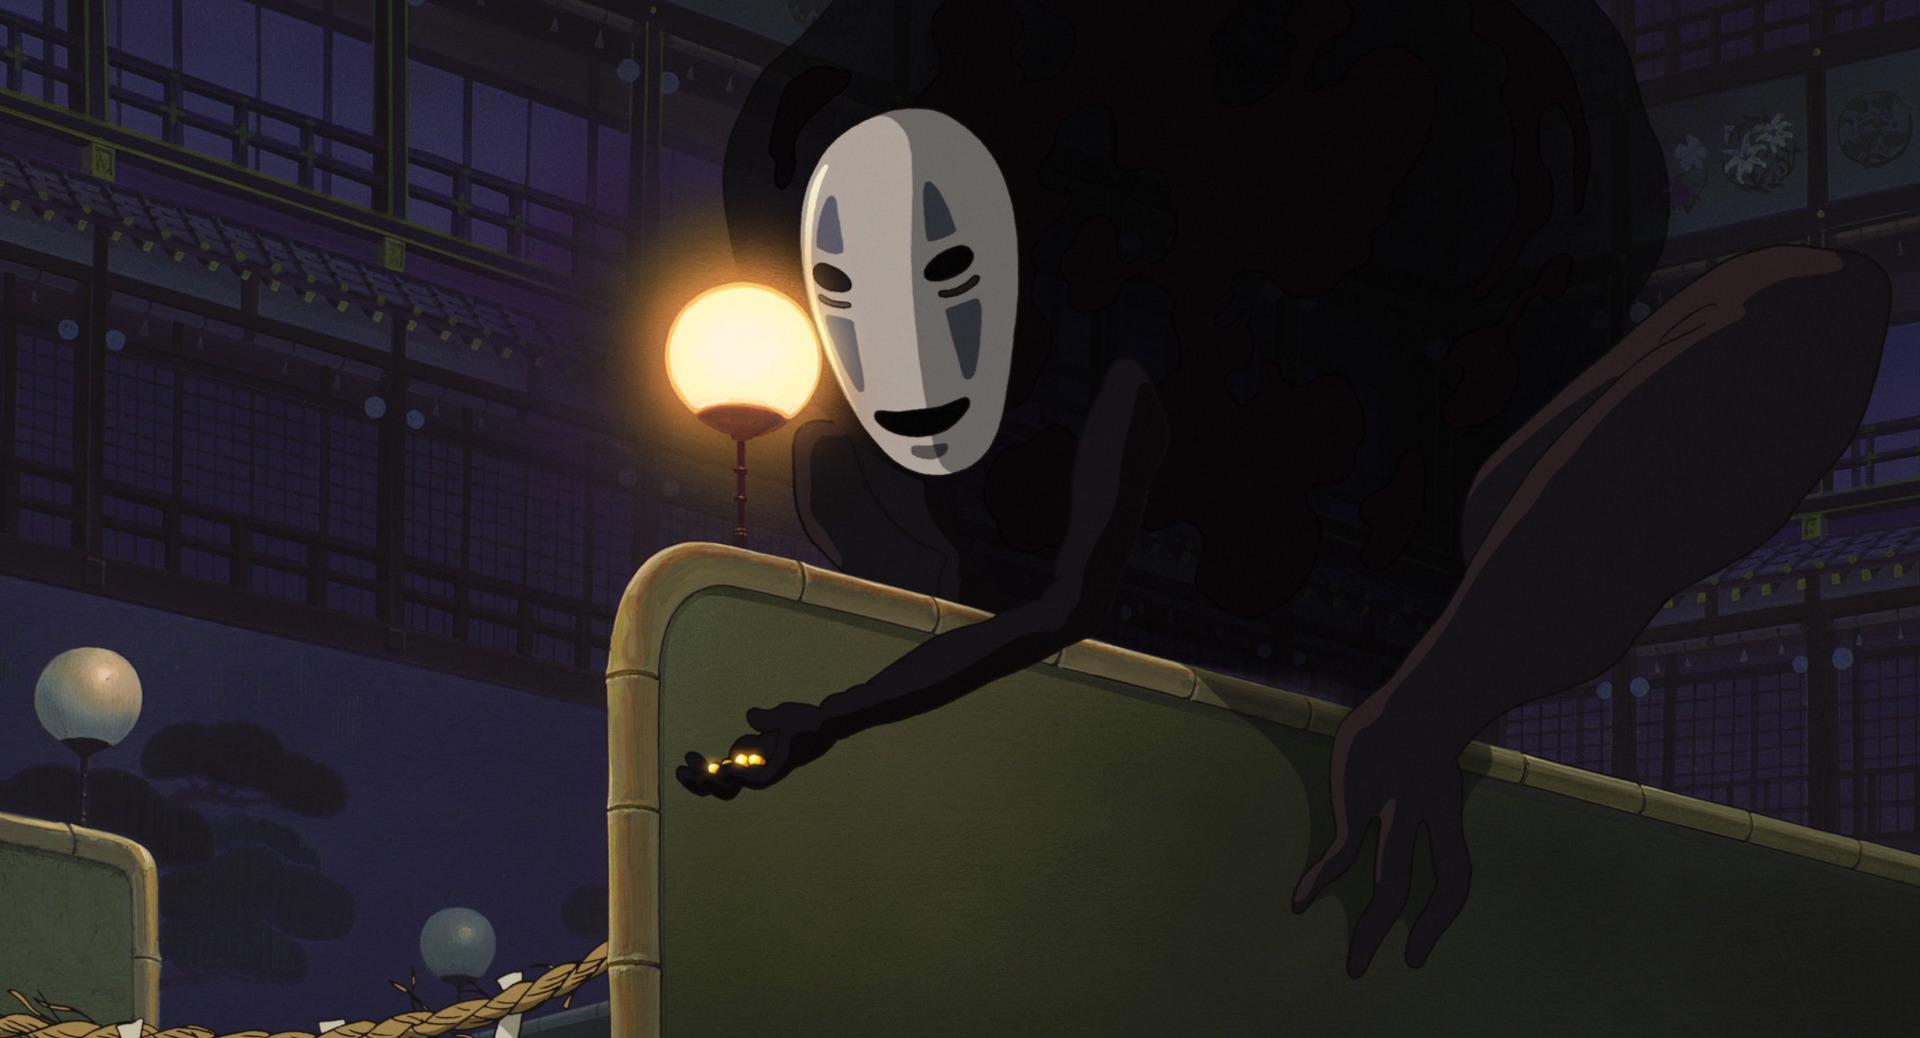 Image gallery for Spirited Away.